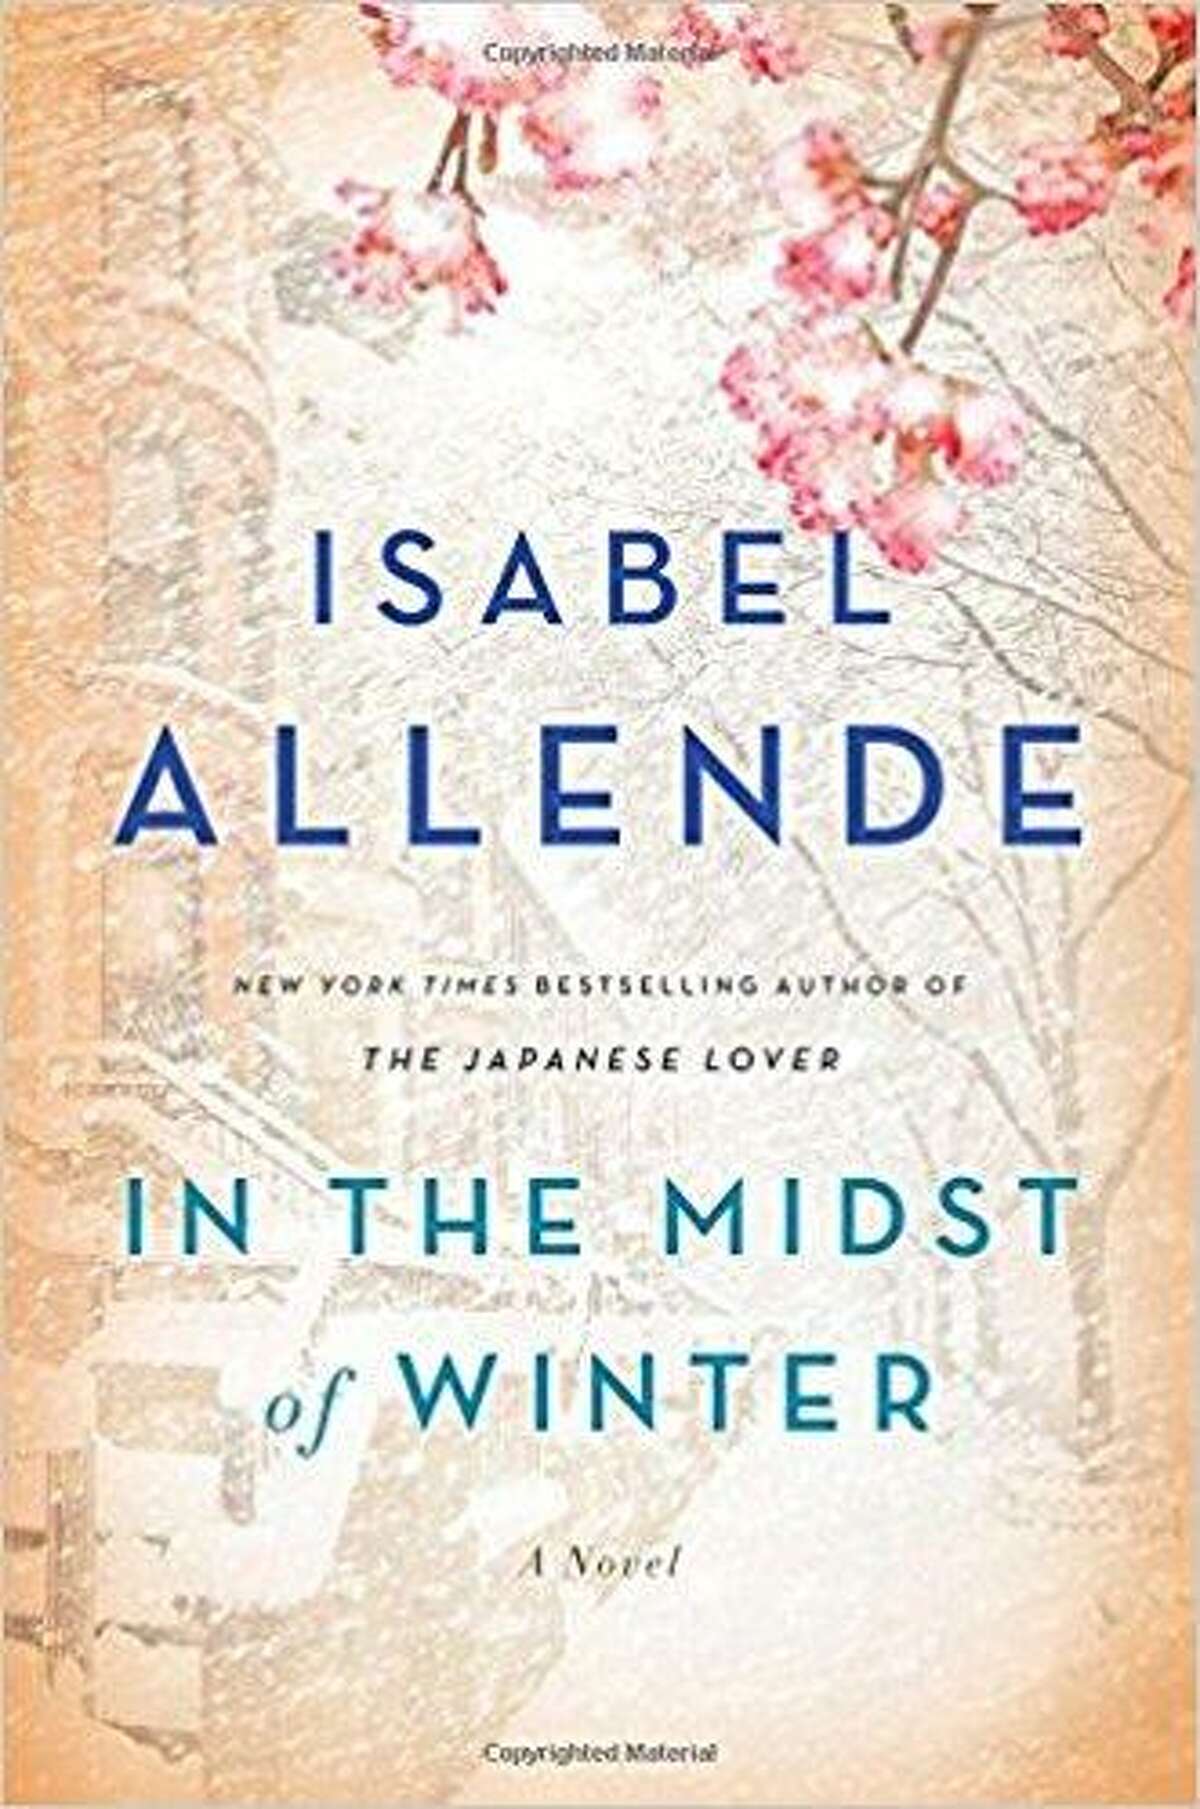 “In the Midst of Winter” by Isabel Allende